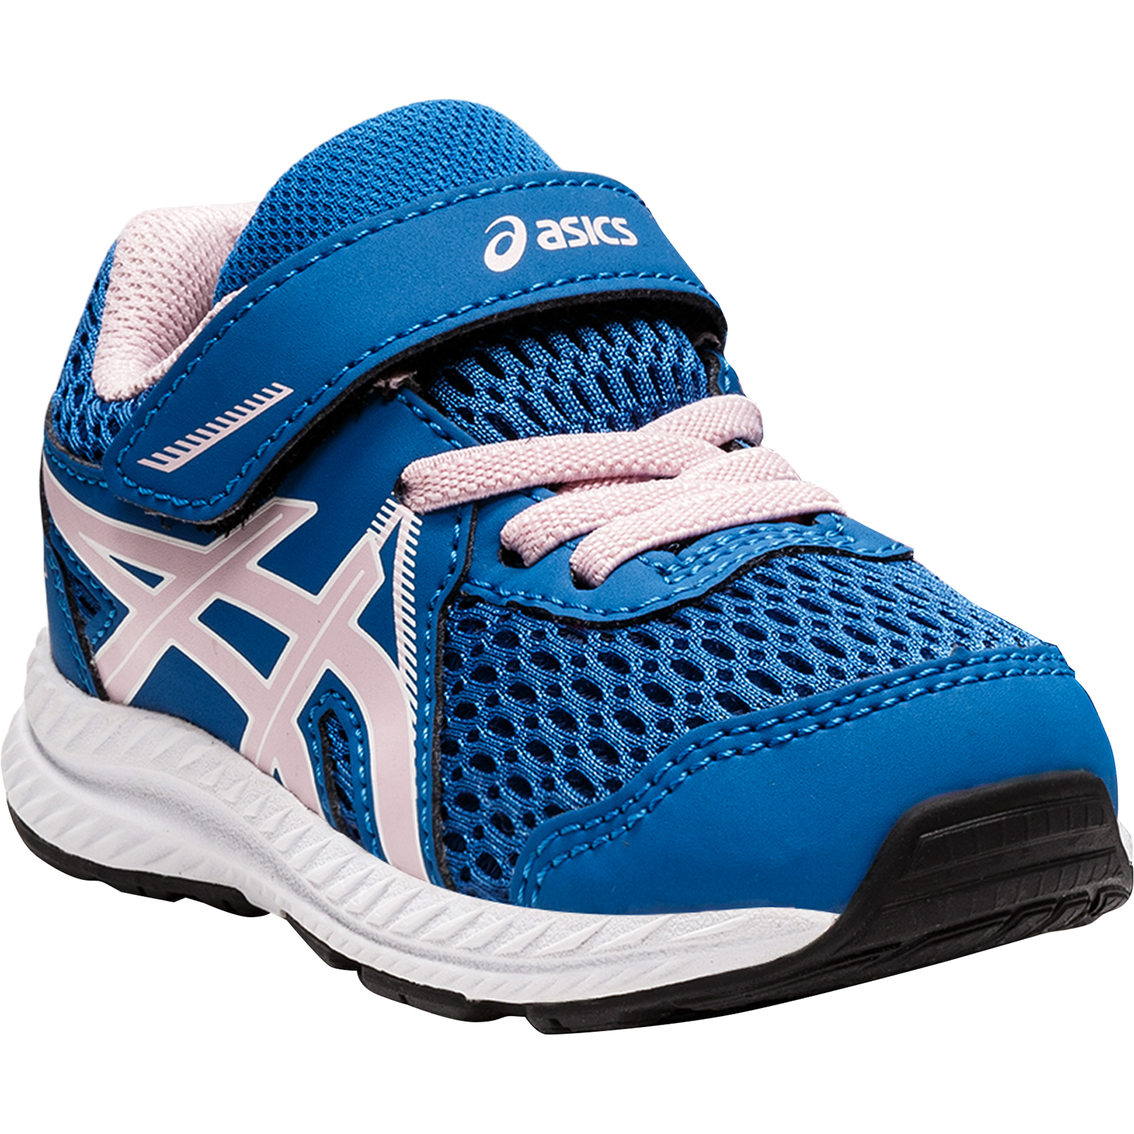 ASICS Toddler Girls Contend 7 Running Shoes - Image 1 of 7